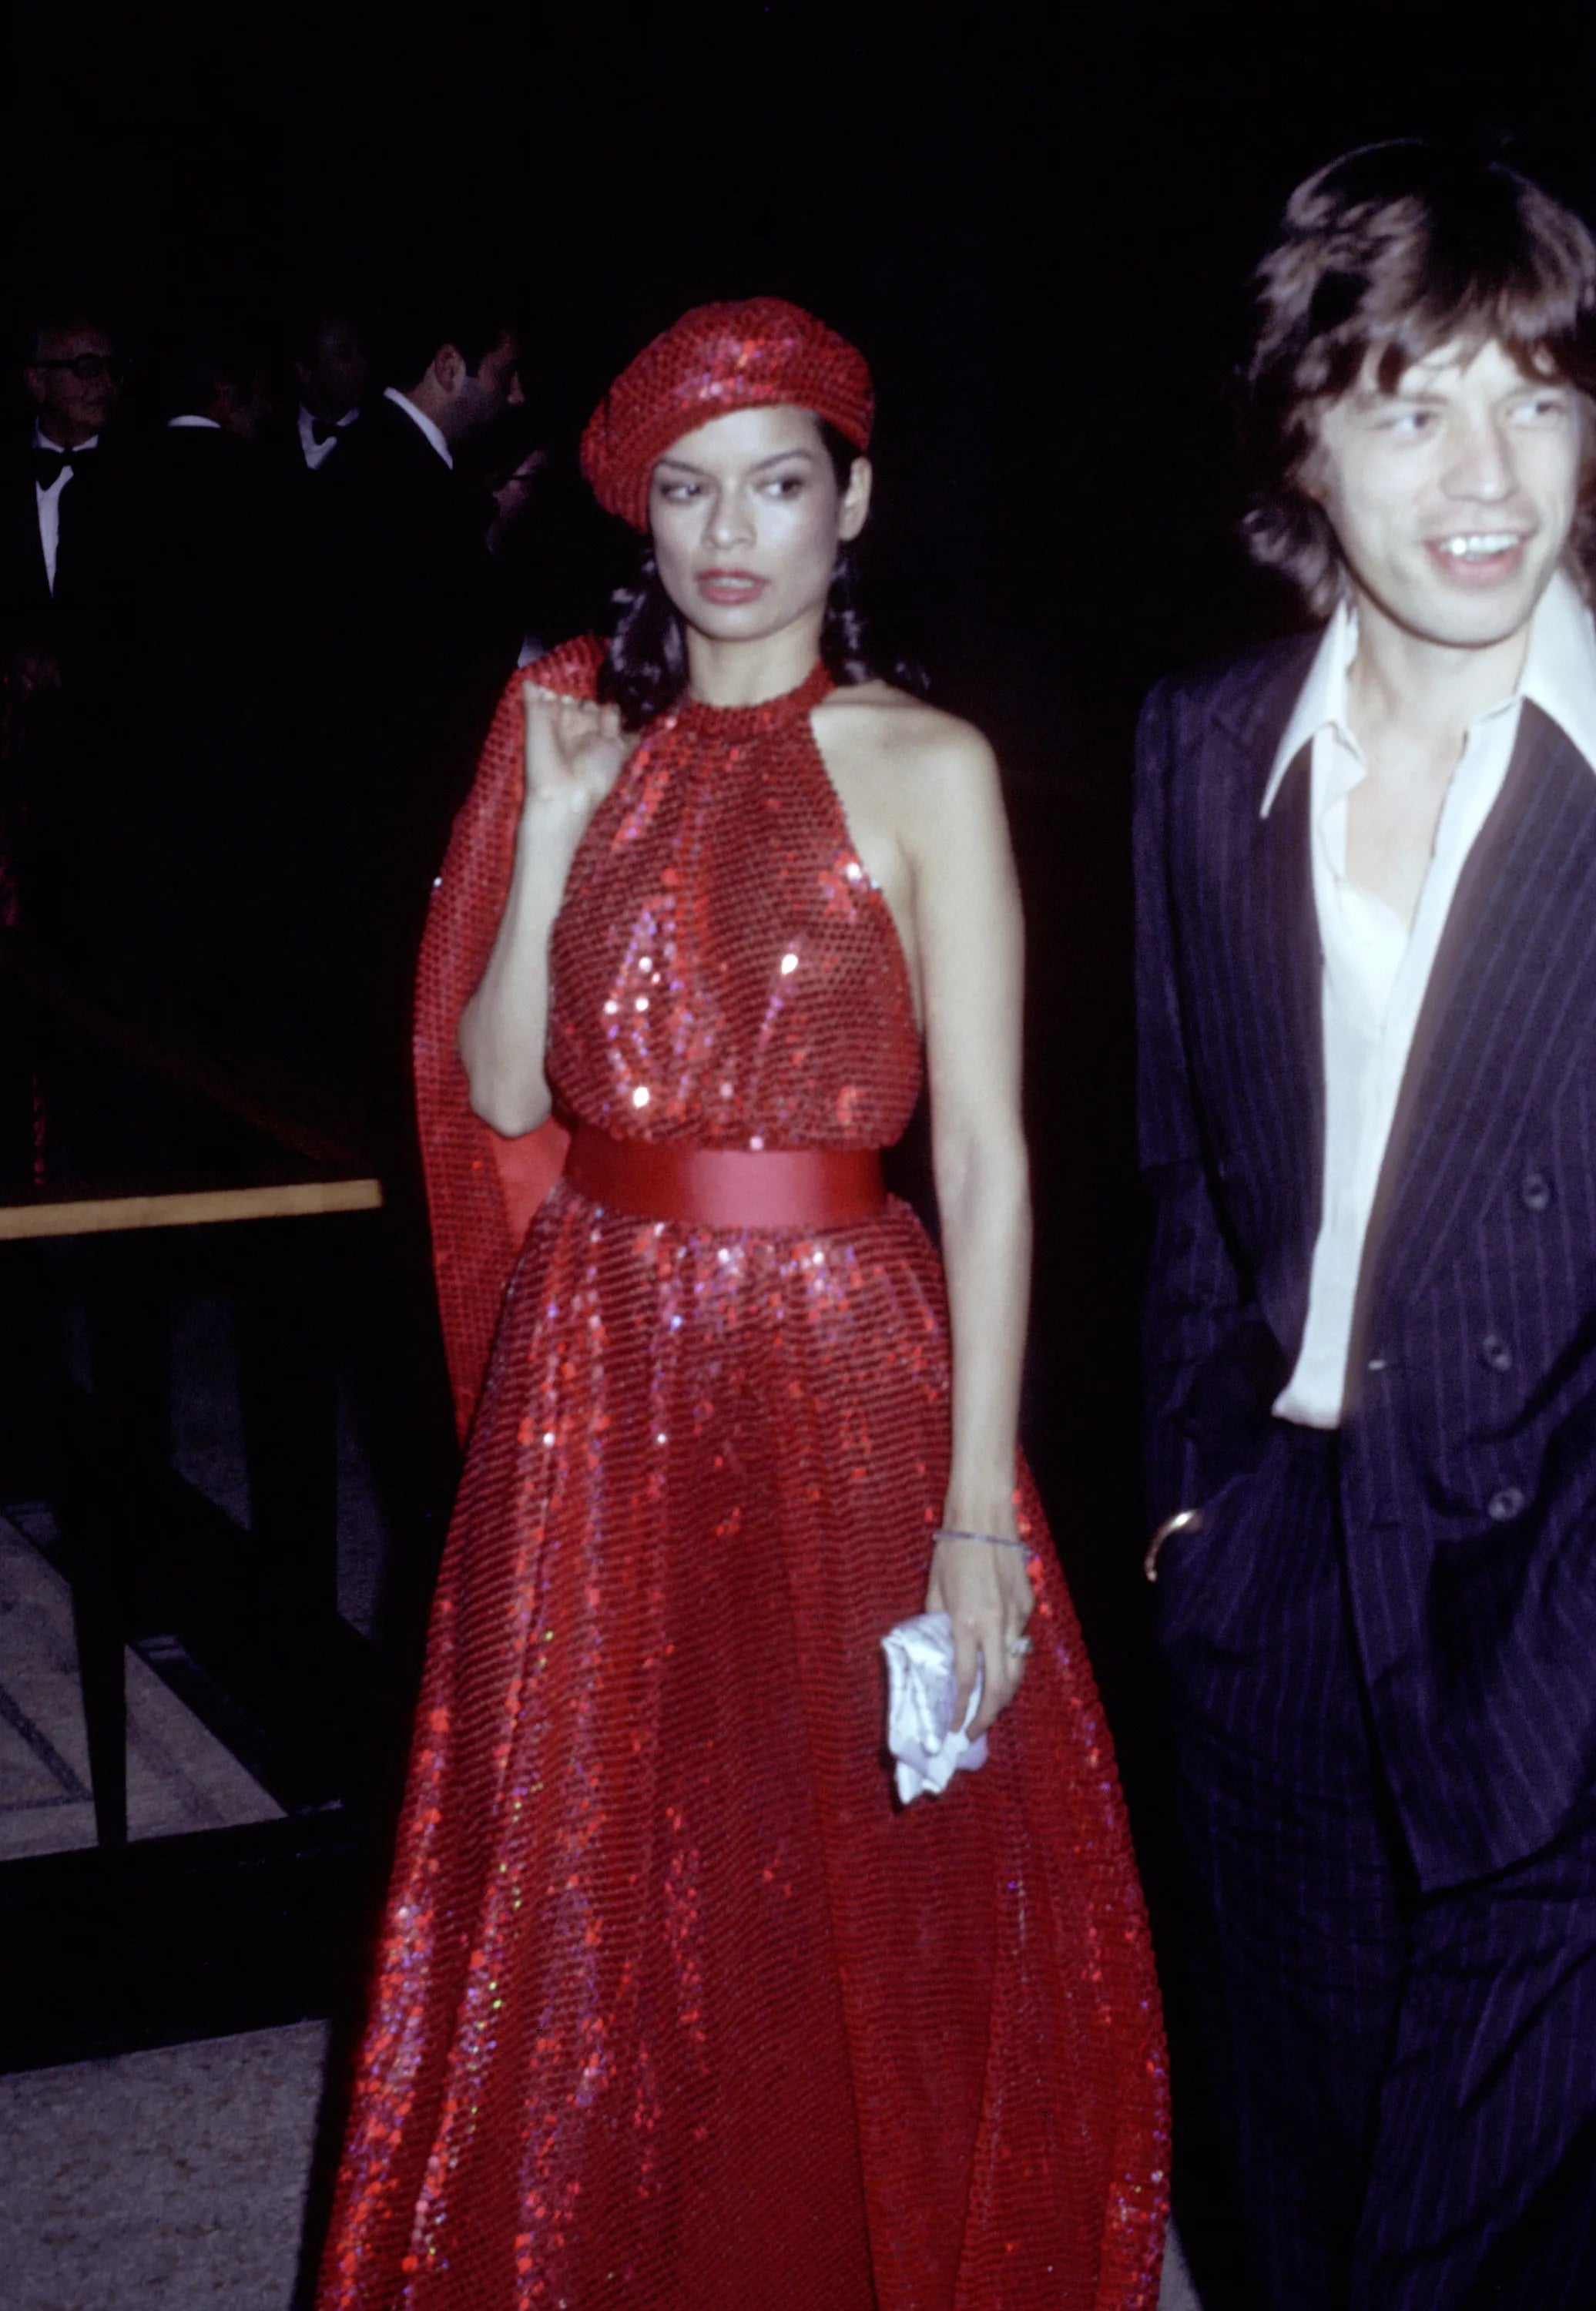 Bianca & Mick Jagger in a red sequin dress